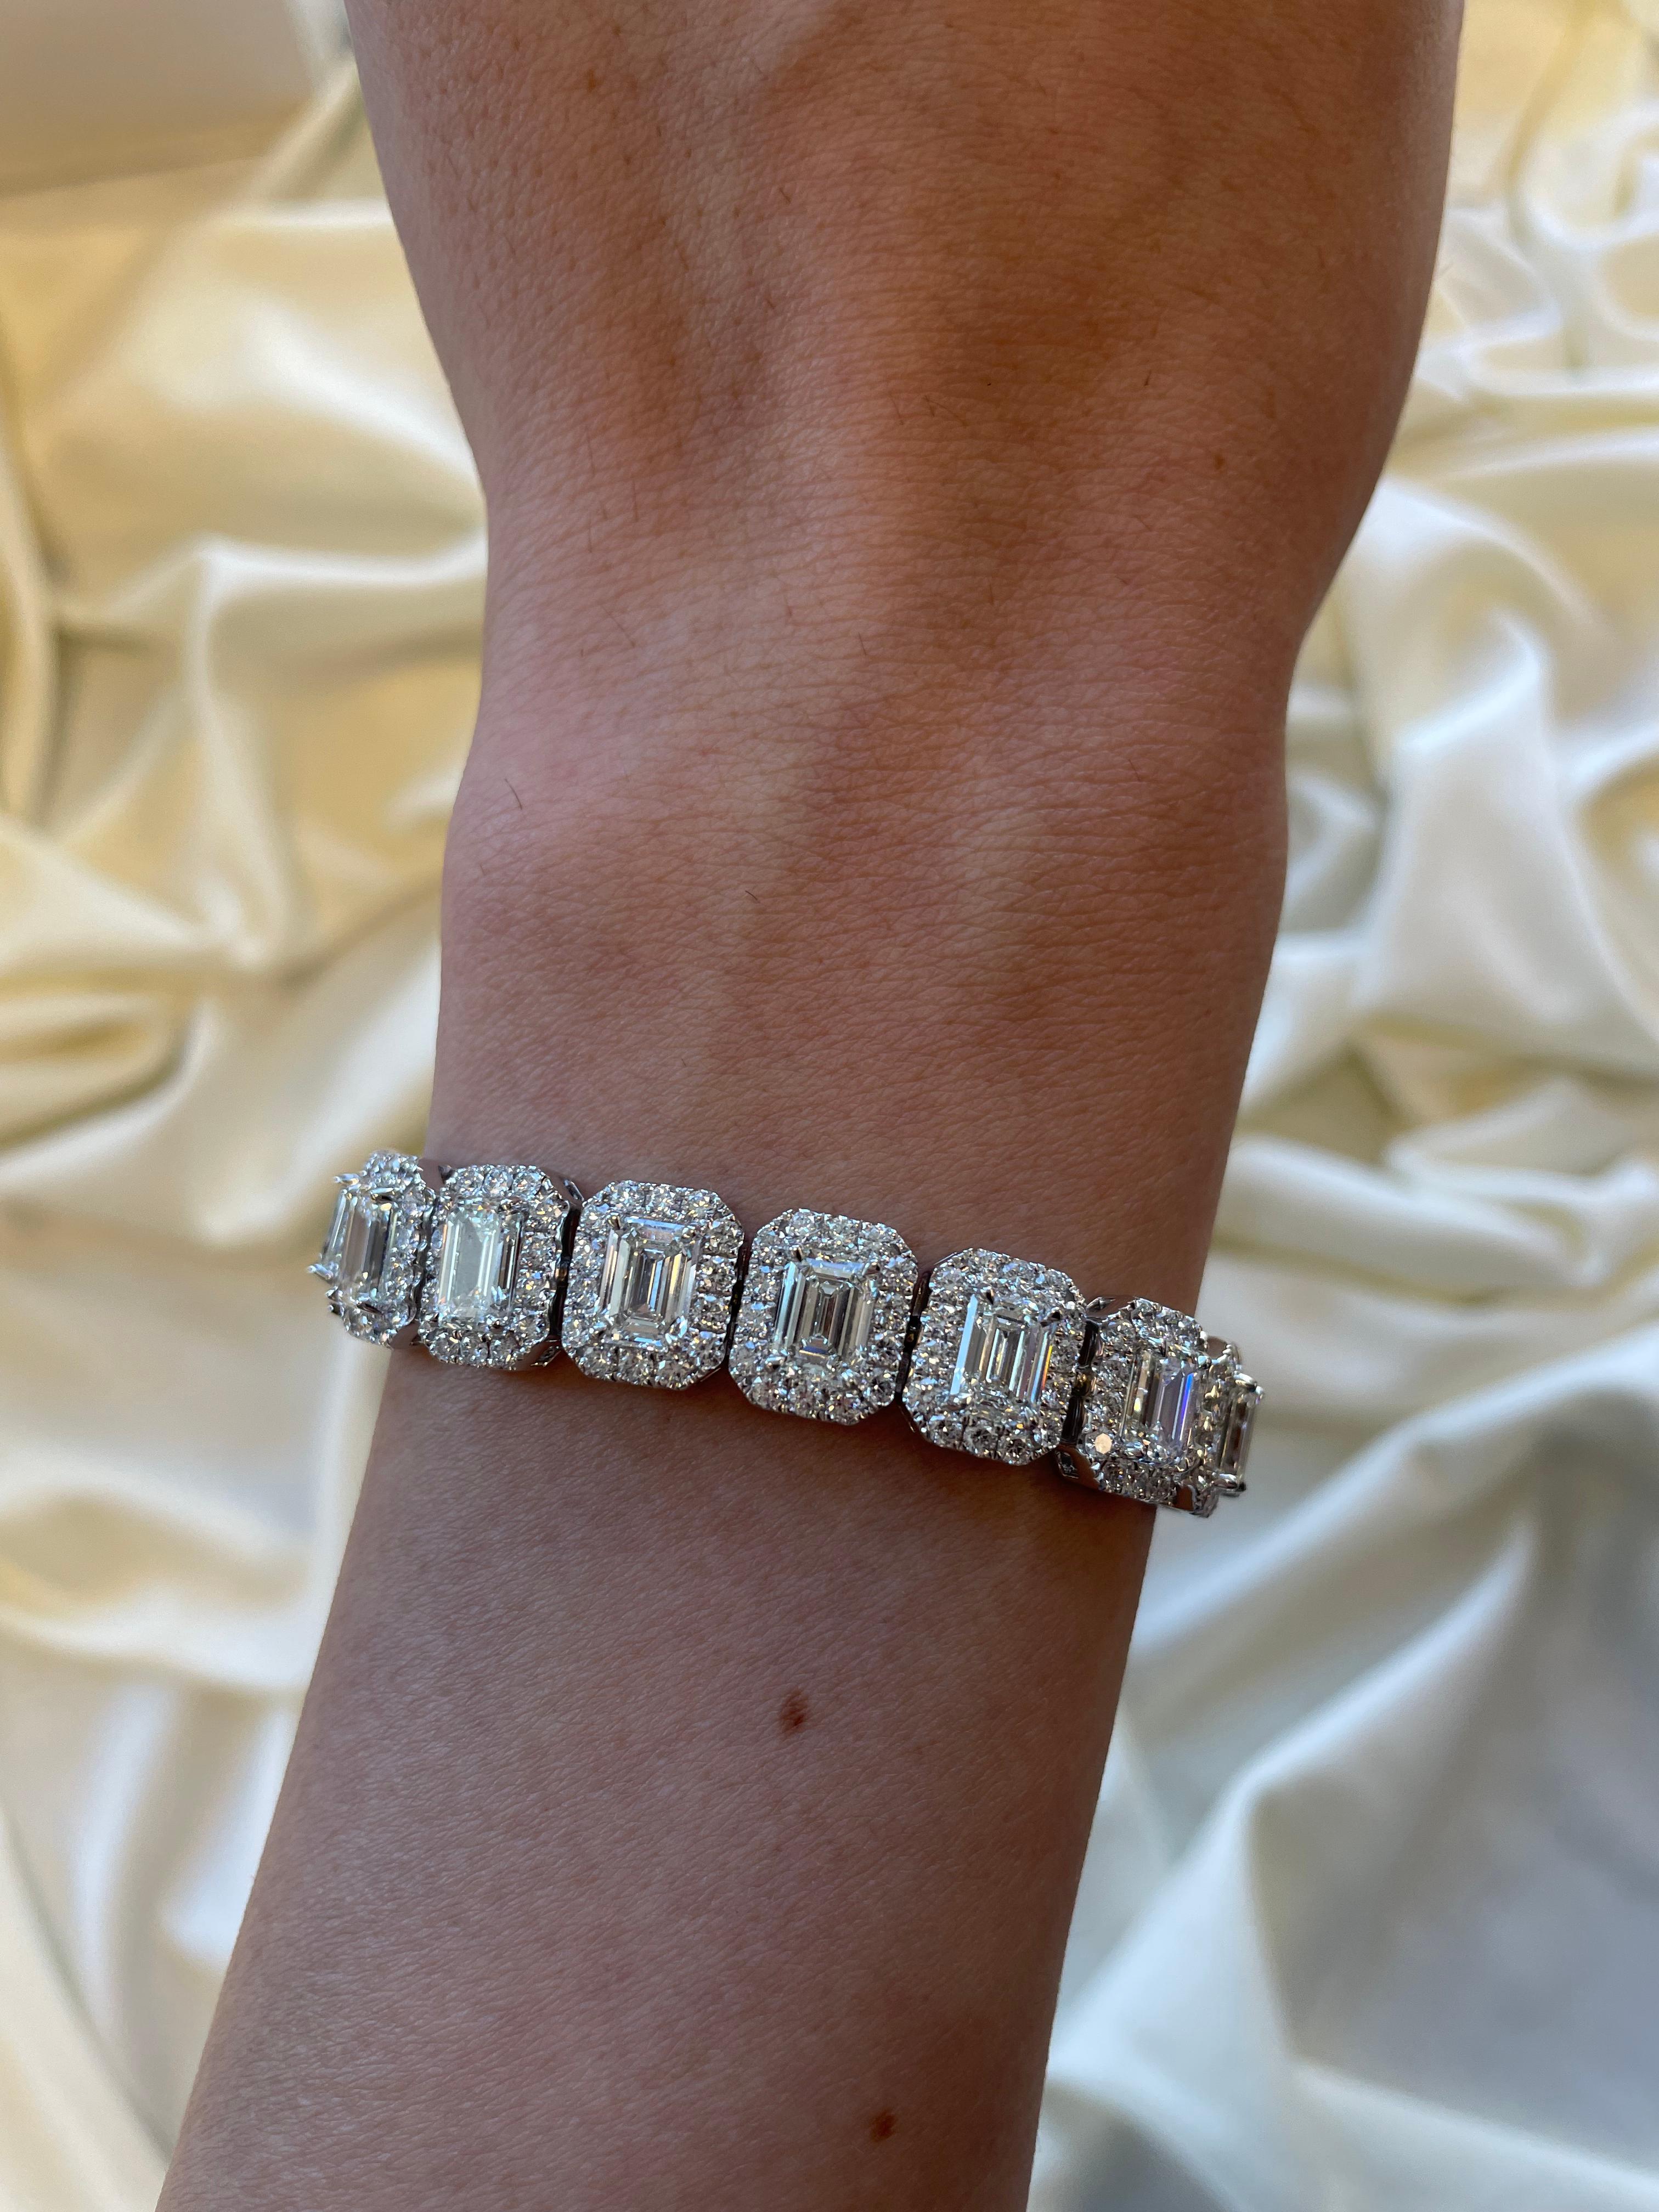 Exceptional modern emerald cut diamond tennis bracelet with halo, all center stones GIA certified. High jewelry by Alexander Beverly Hills.
26.55 carat total diamond weight. 
20 GIA certified emerald cut diamonds, 20.18 carats (each stone 1ct or